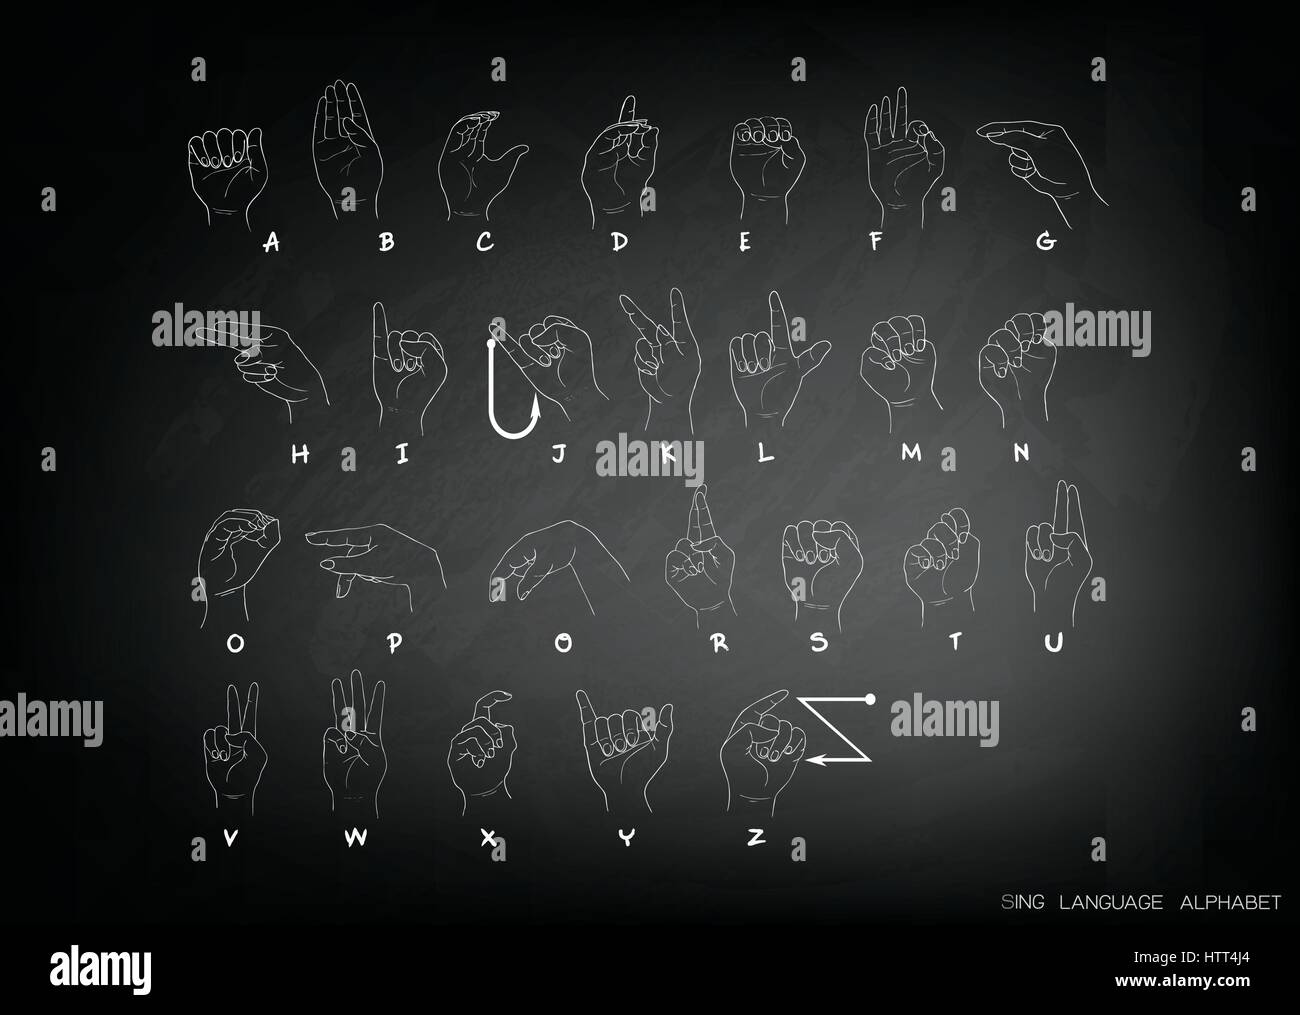 Hand Drawn Sketch of Finger Spelling The Alphabet in American Sign Language on Black Chalkboard. Stock Vector